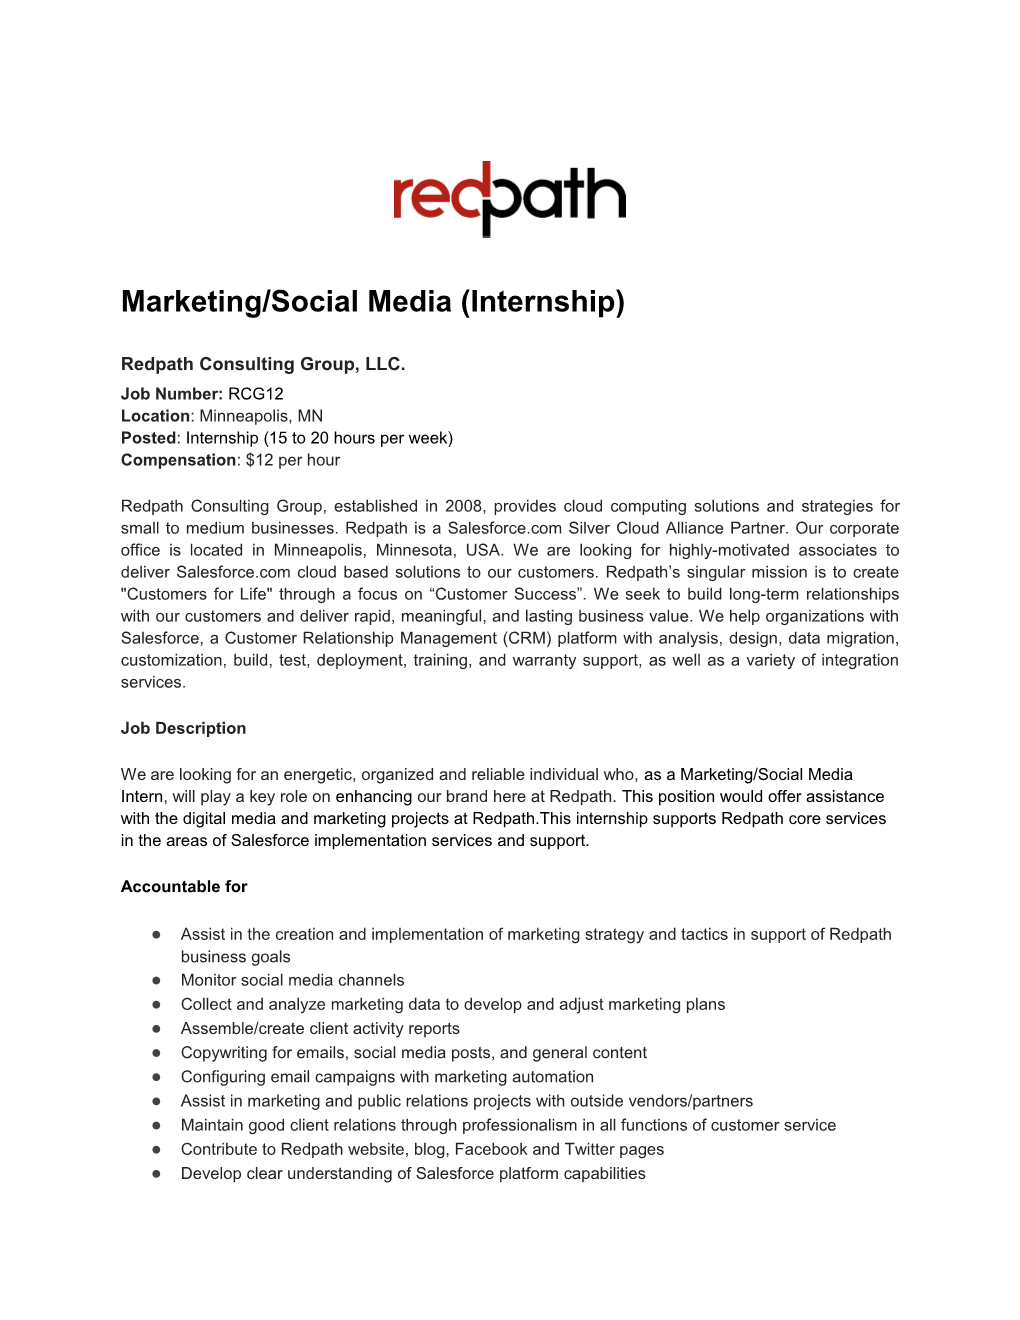 Redpath Consulting Group, LLC